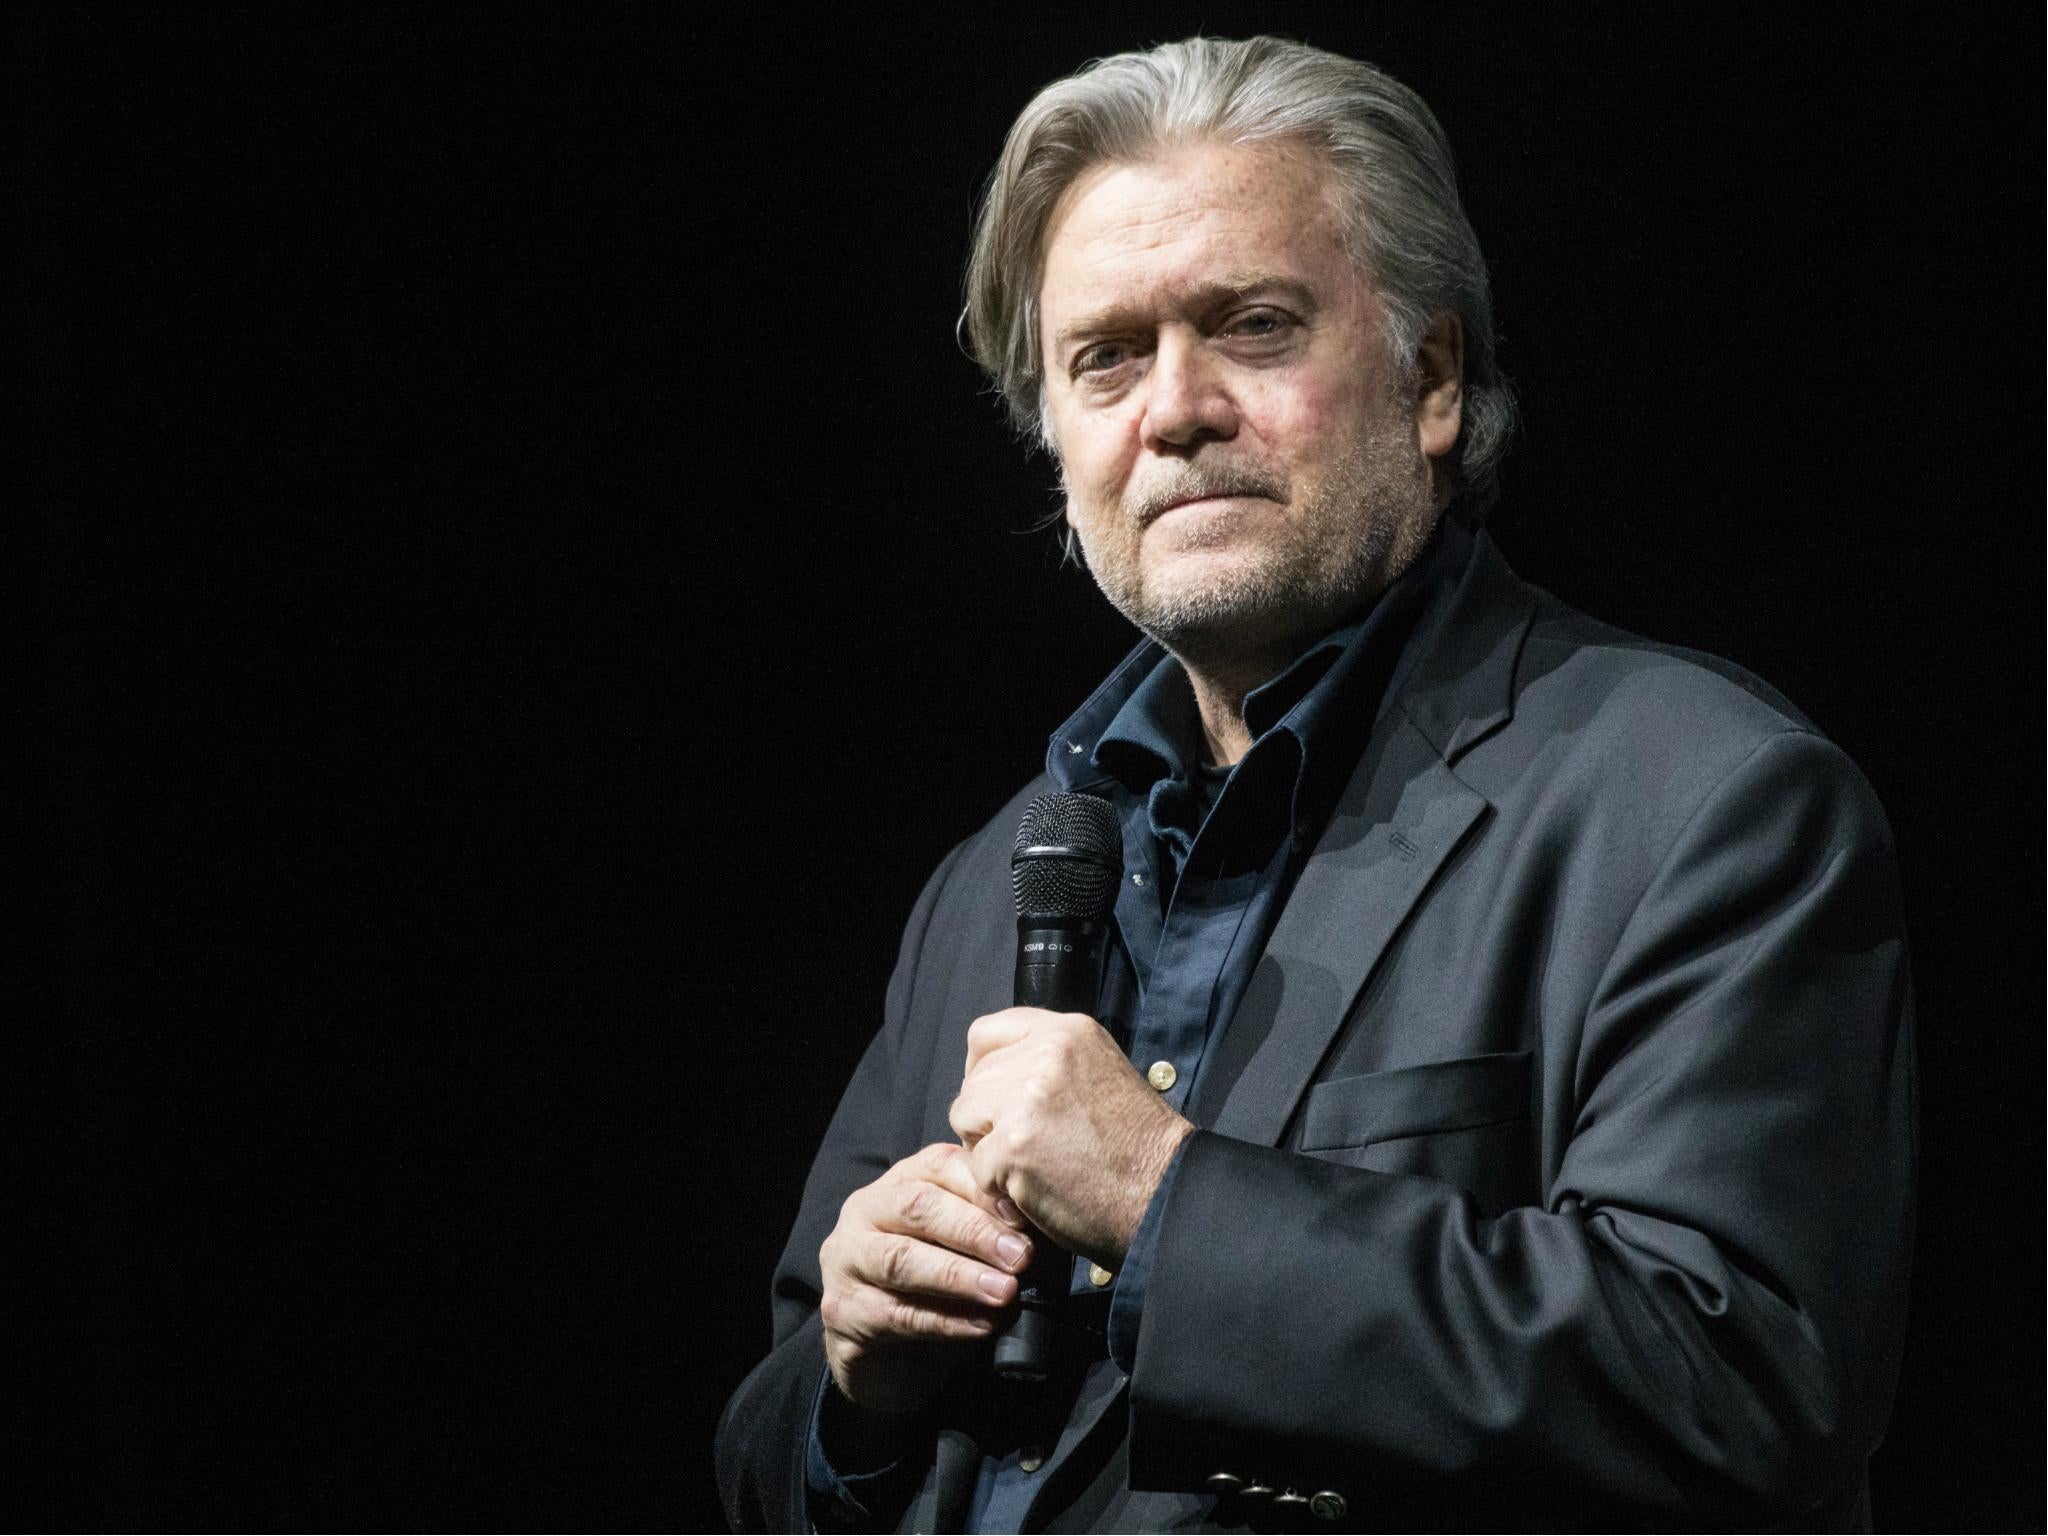 Steve Bannon, the former chief strategist for President Donald Trump, is due to speak at the Financial Times’ Future of News Summit